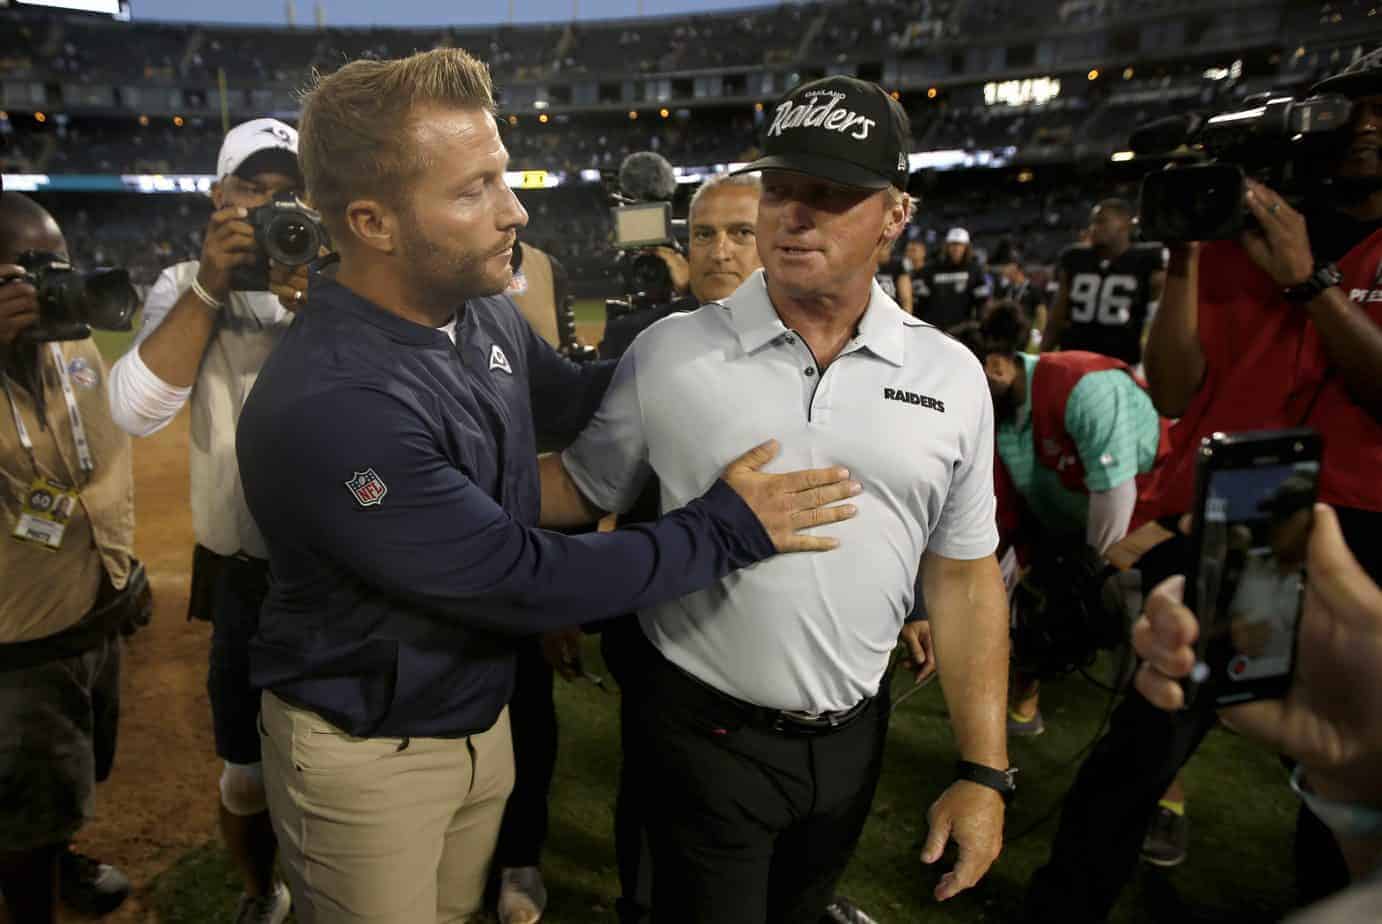 Many fans were pointing out a Sean McVay and Jon Gruden handshake moment during a chippy practice between the Raiders and Rams